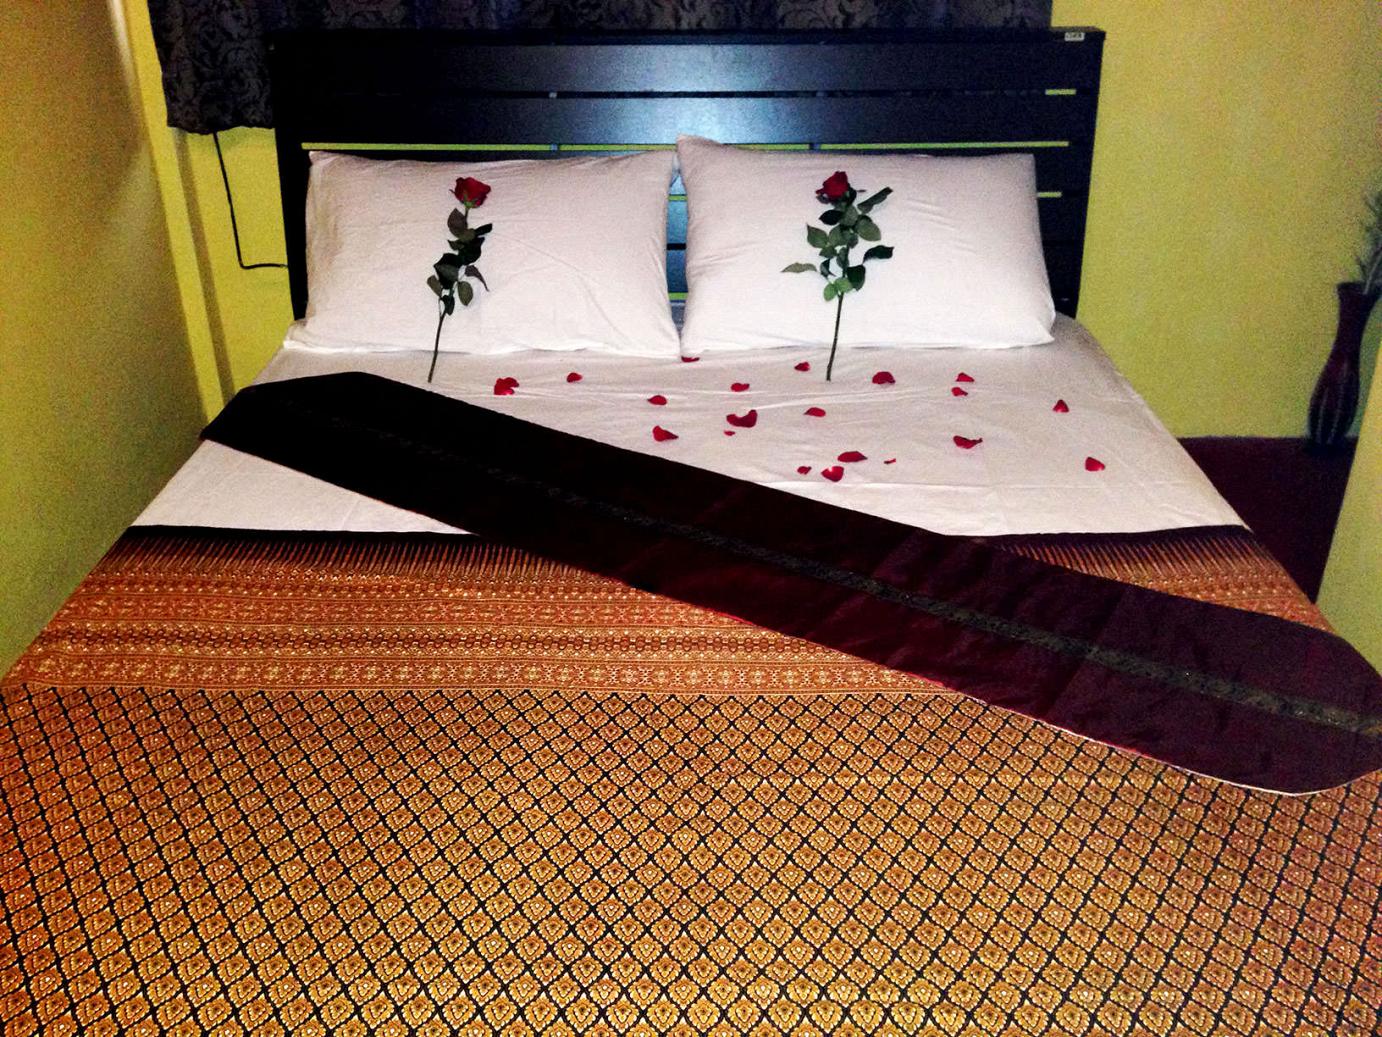 VIP king size bed at HoneyBee Massage